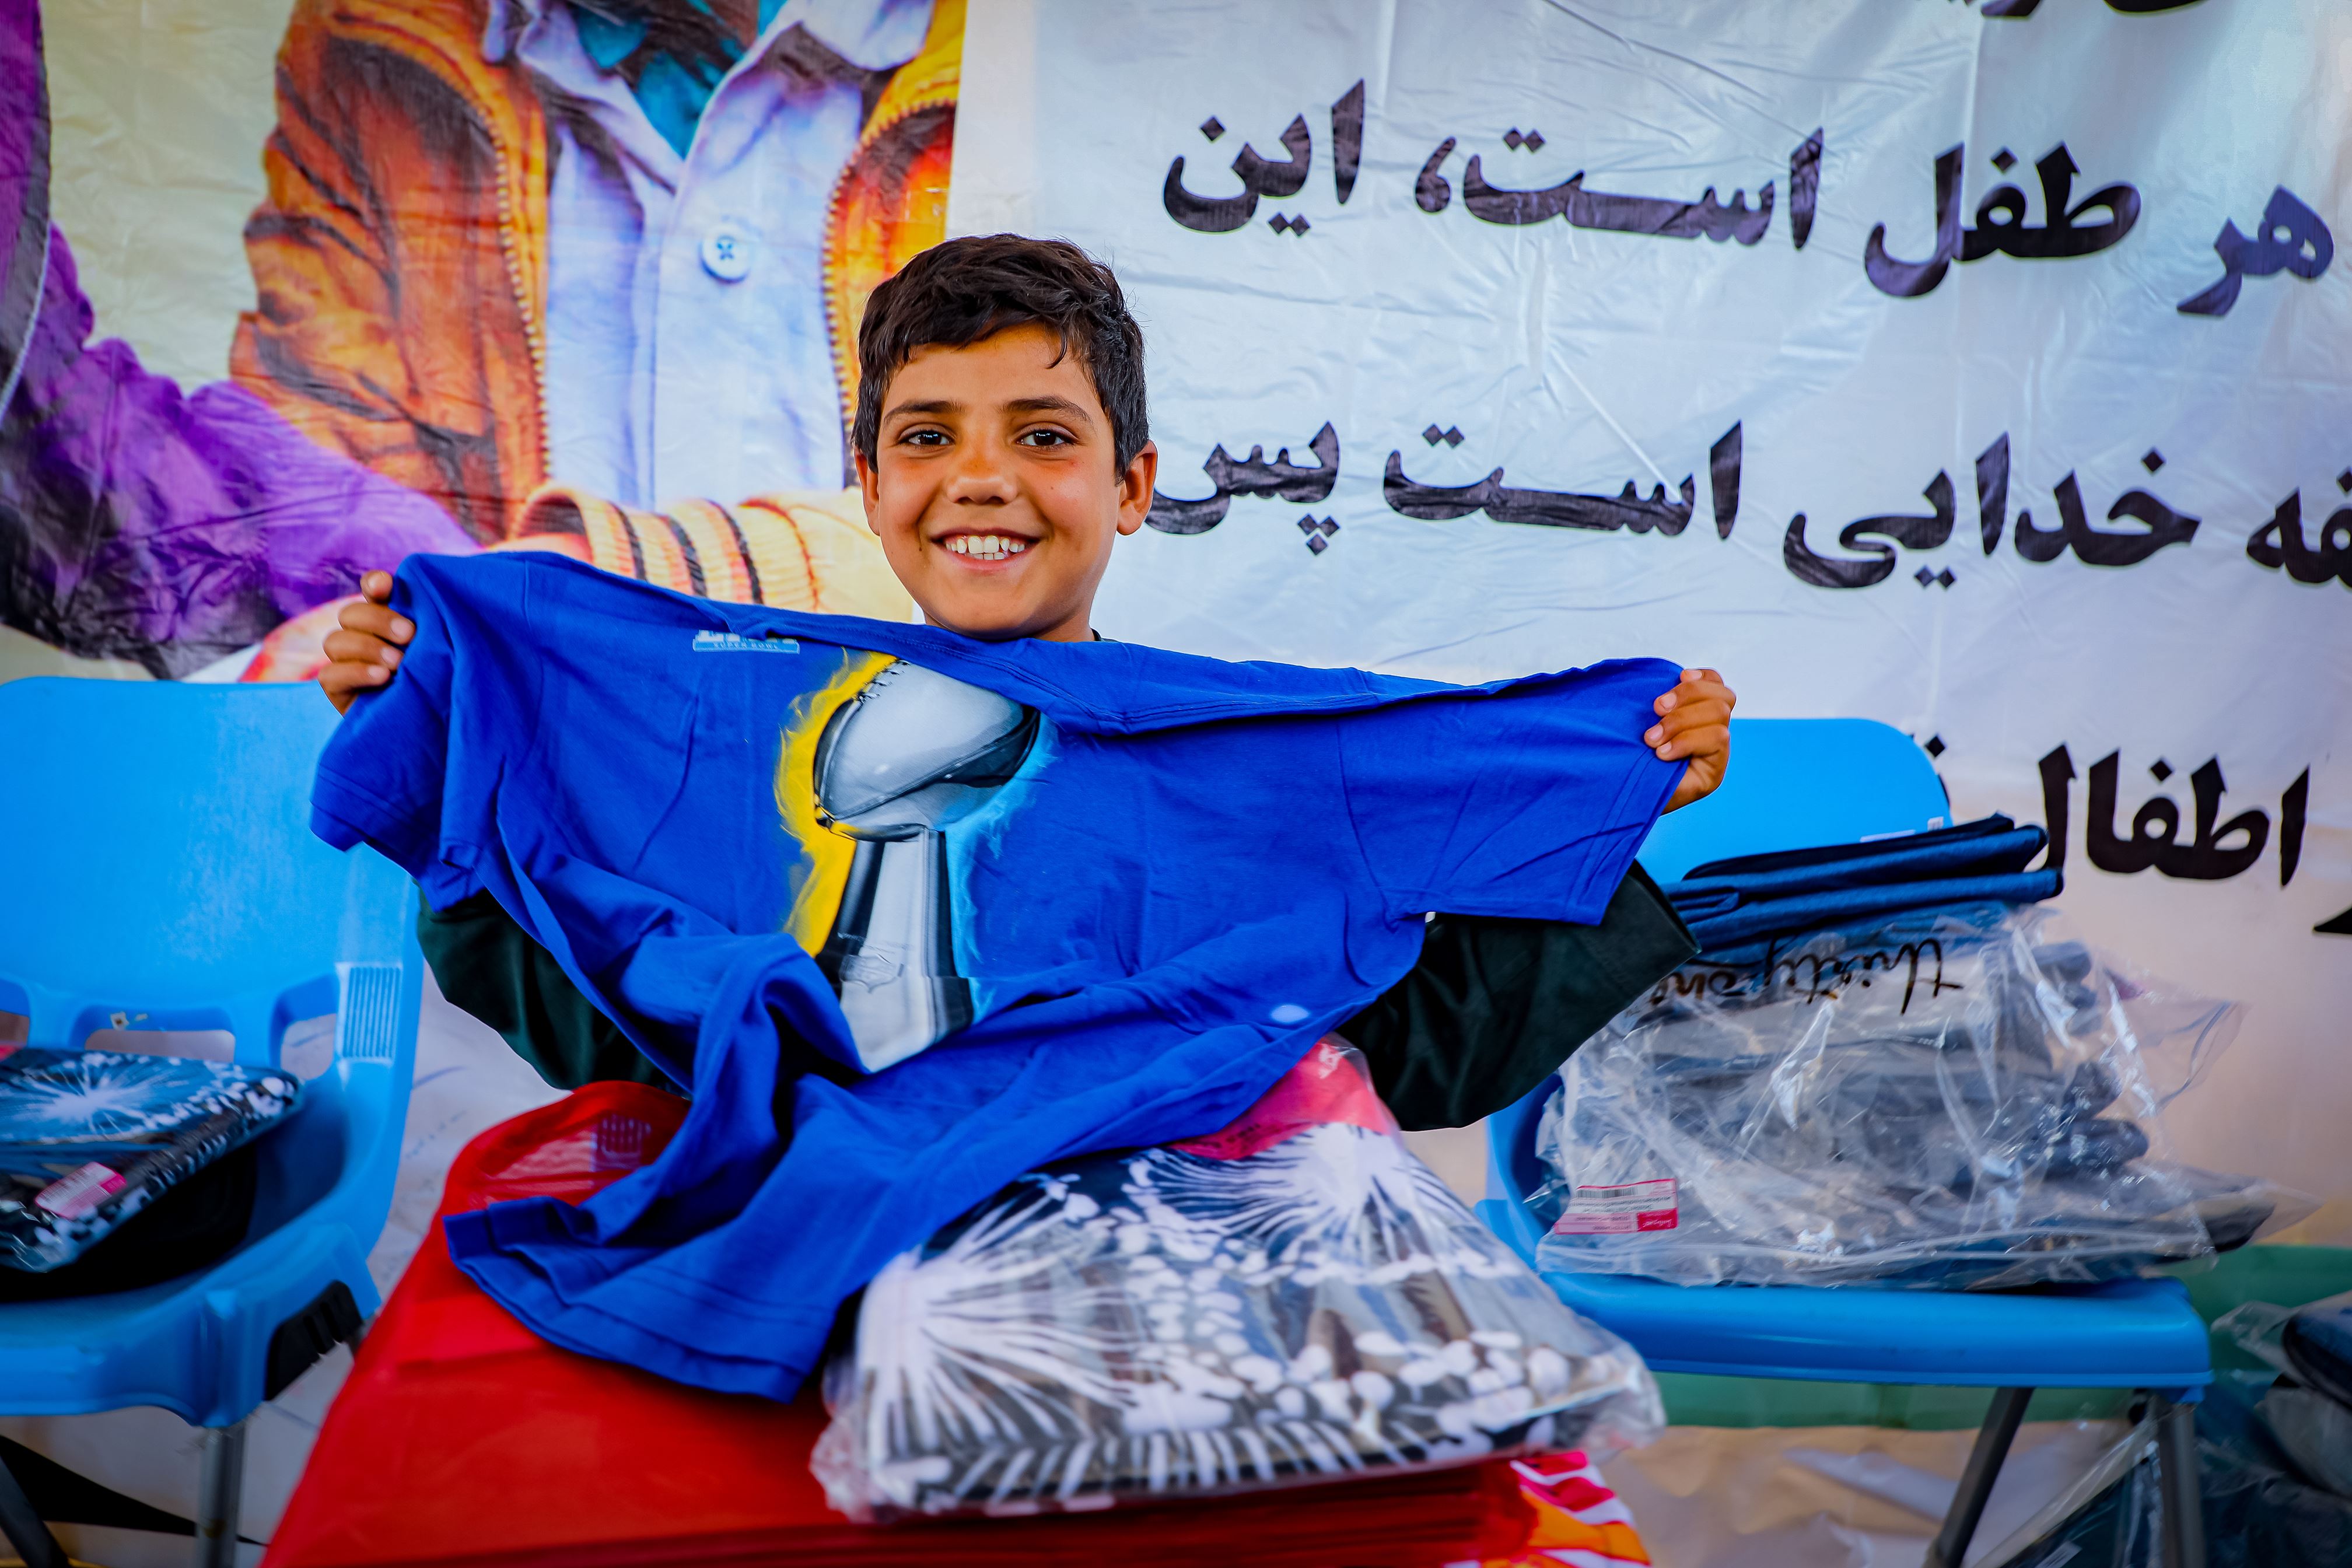 An Afghan boy, 8, smiles widely and displays to the camera the blue shirt he has received in a gift package. He is surrounded by other packages. 